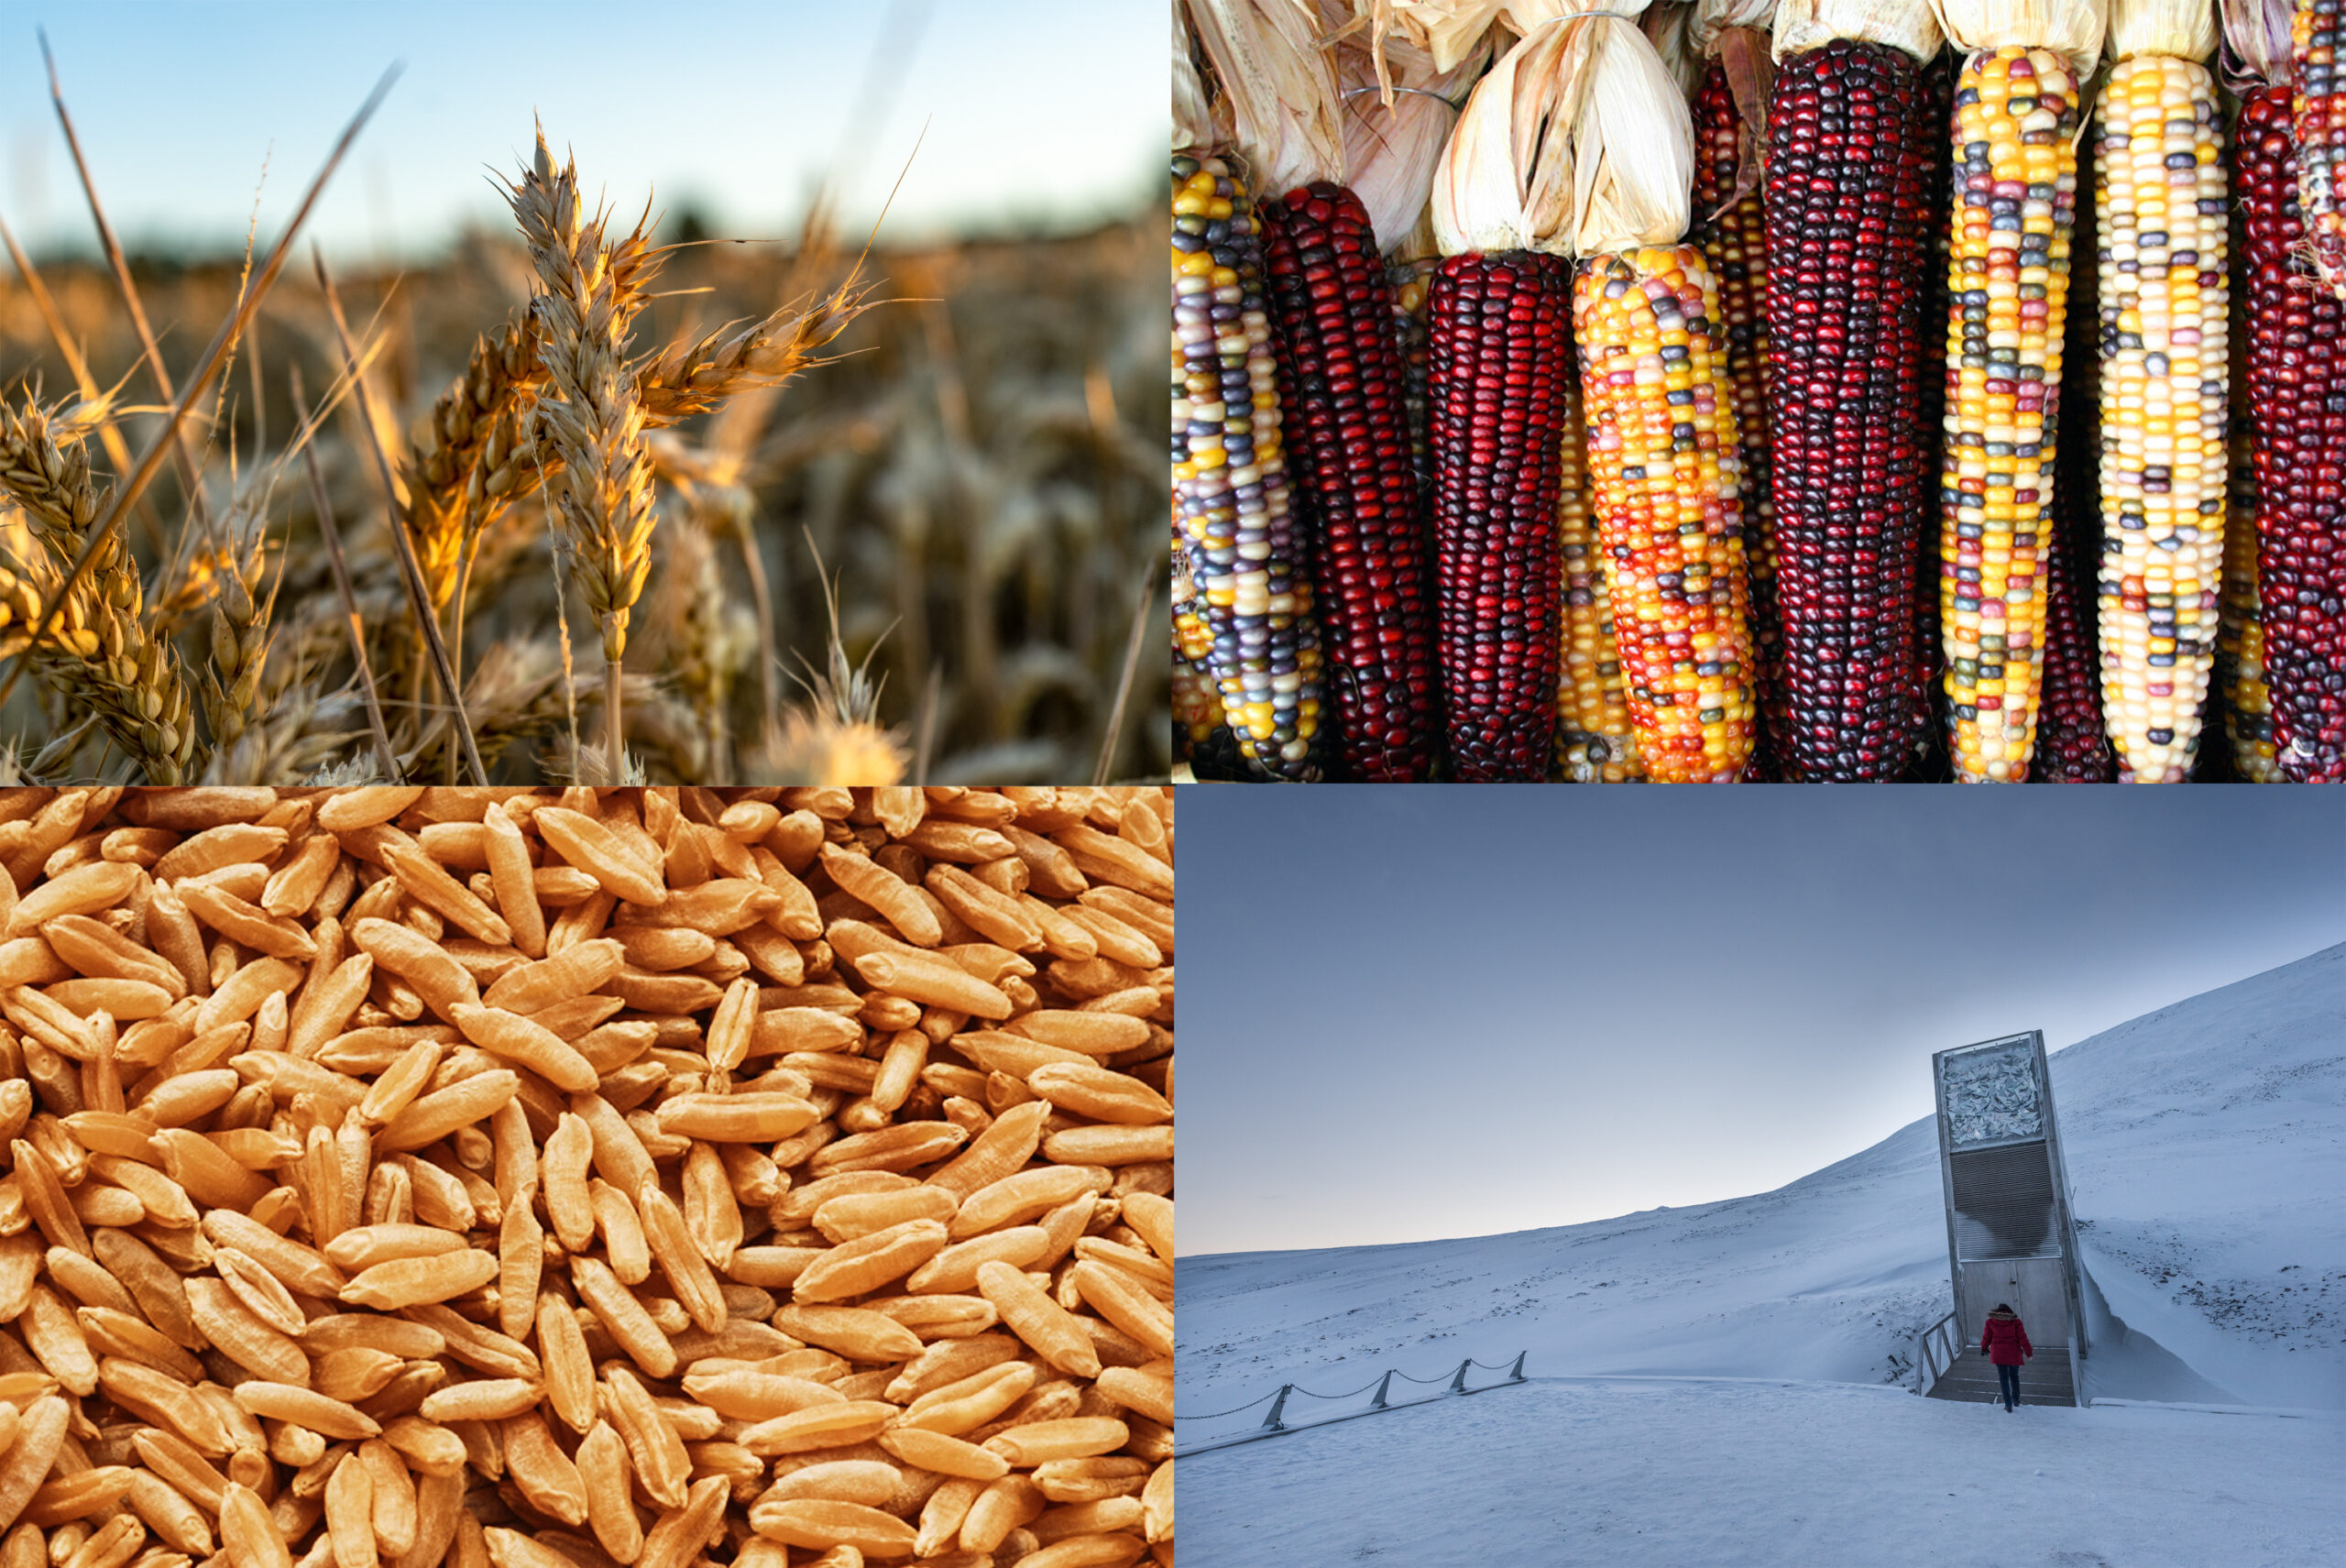 Clockwise: Wheat in a field, flint corn, kamut grains, and the Svalbard Global Seed Vault.